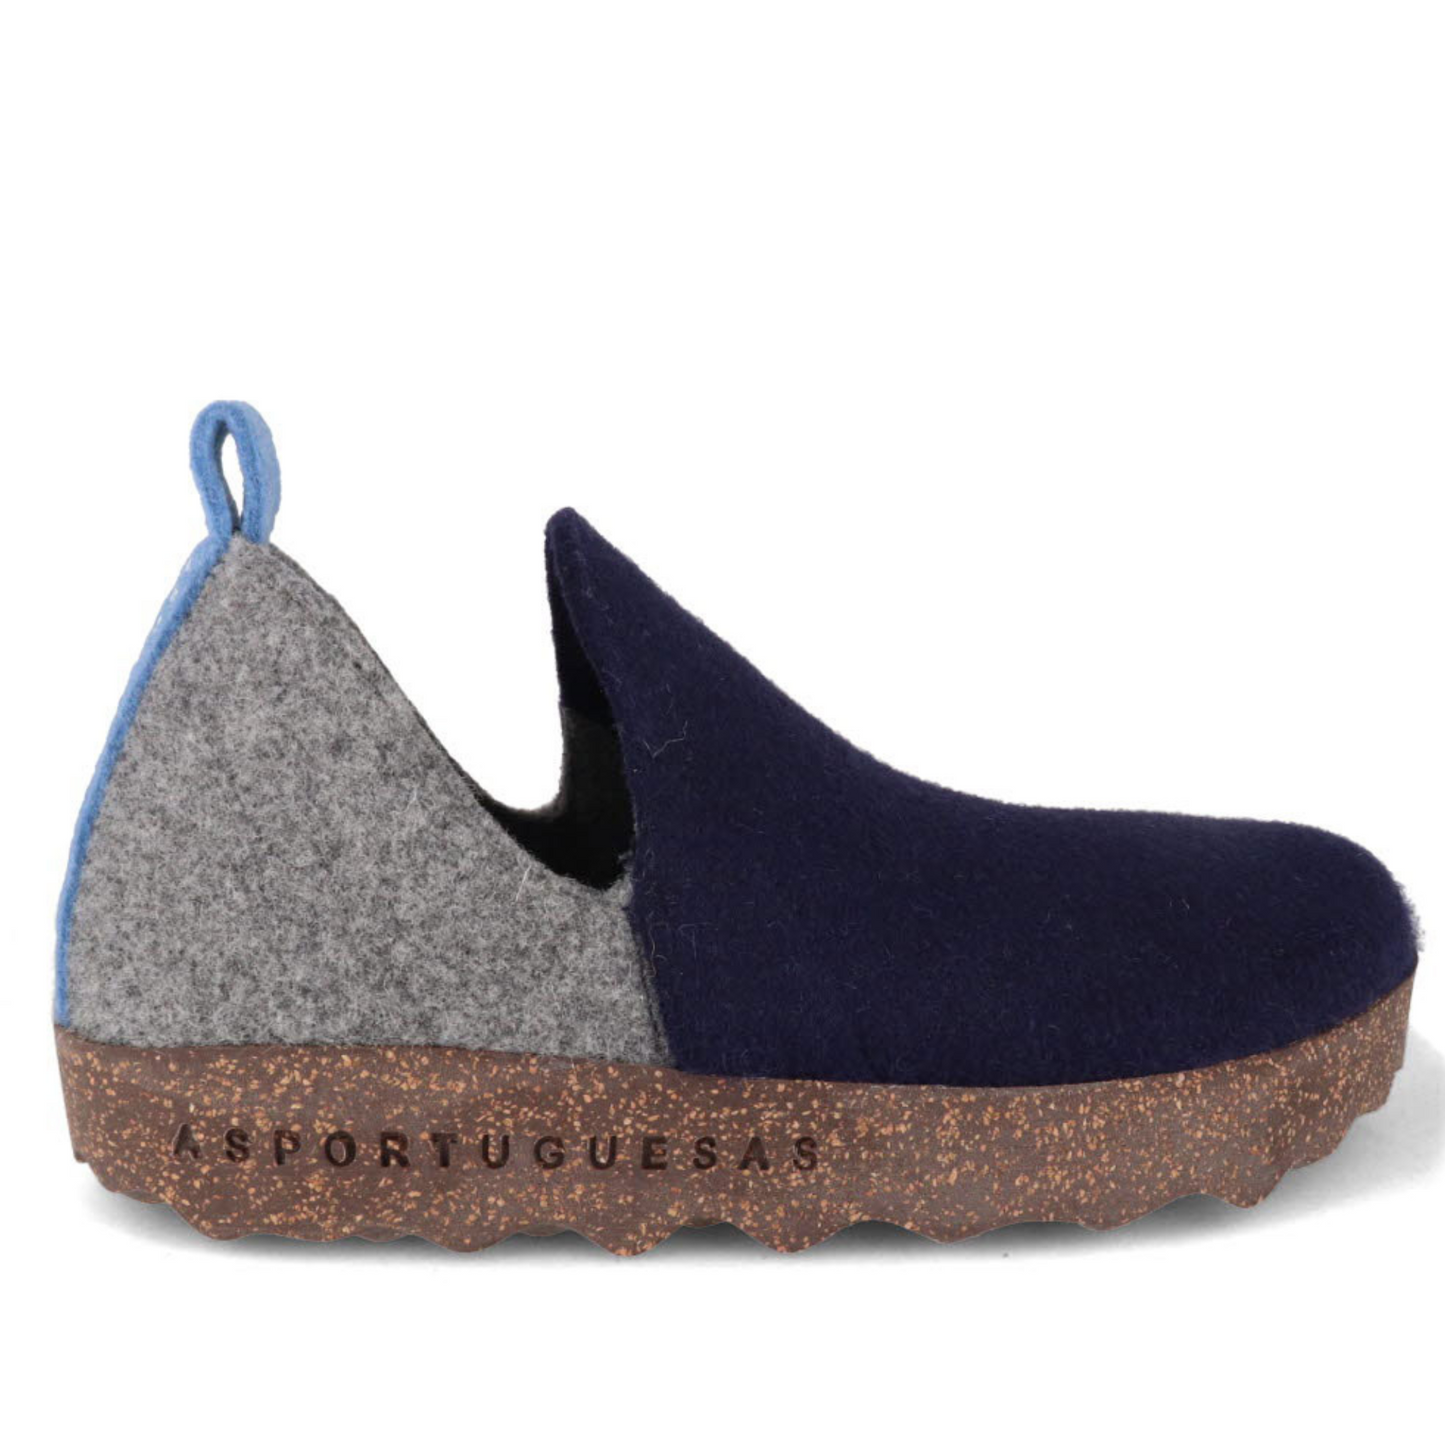 A grey and navy blue wool sneaker with oblong cutouts, blue heel tab, and speckled cork soul is pictured from a side angle.